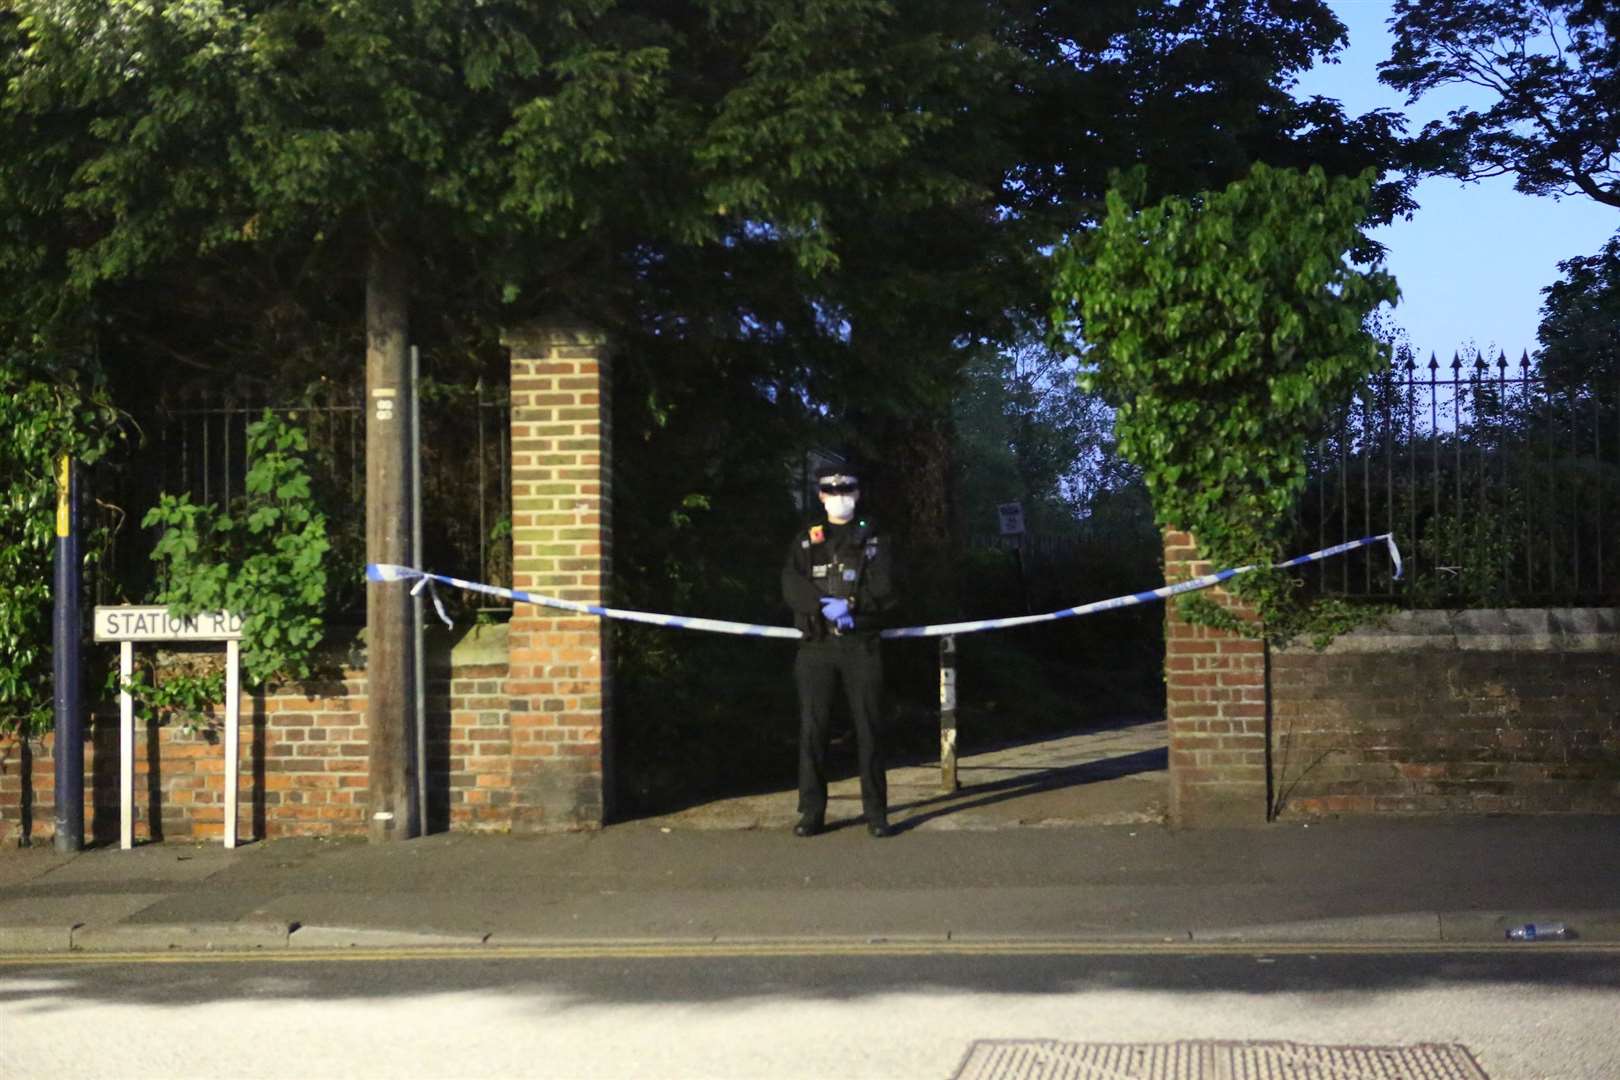 Brenchley Gardens will be locked at night after a serious of incidents in the park